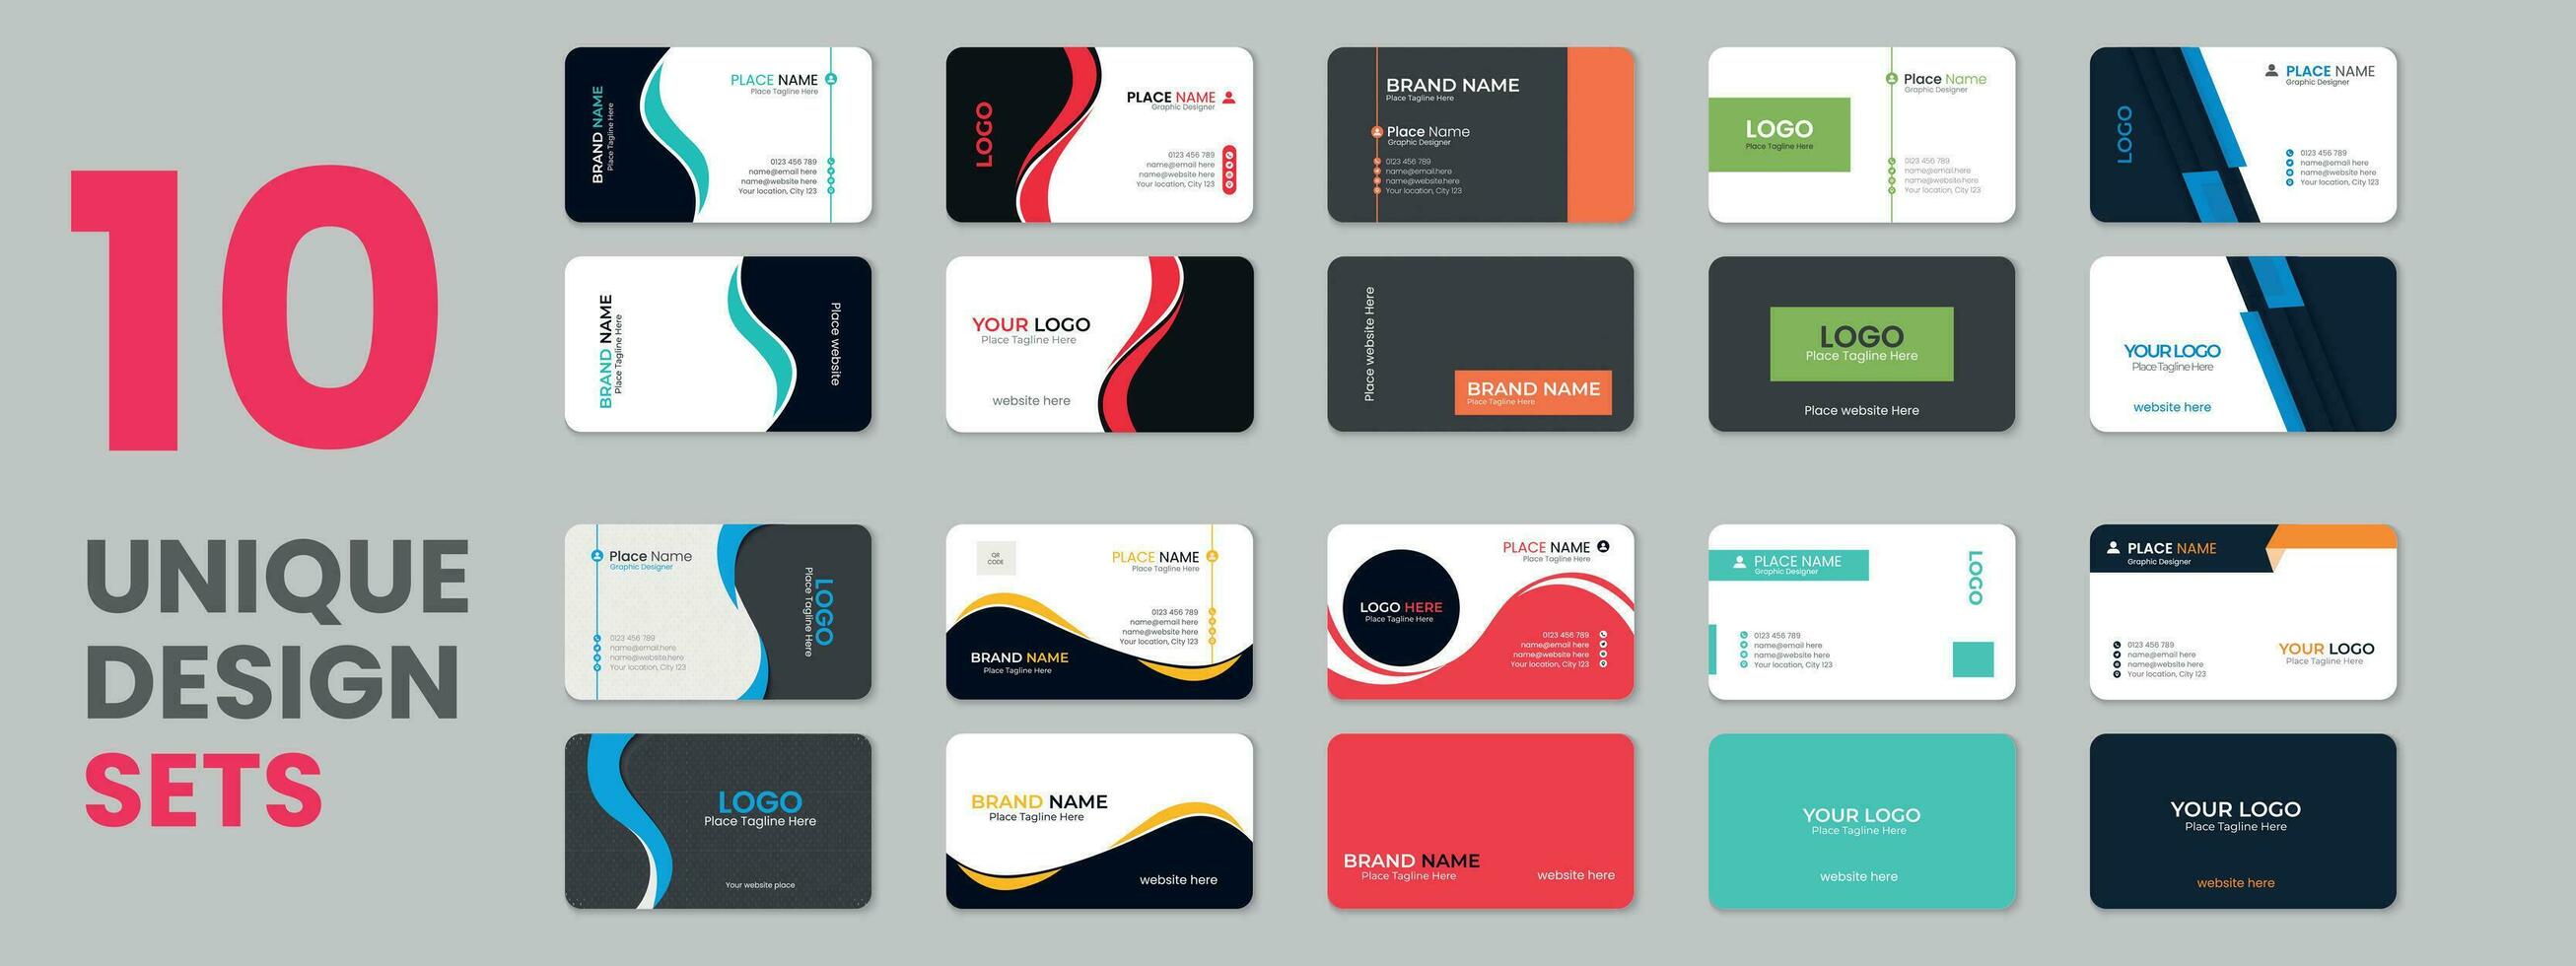 Collection of business card, bundle of business card, set of business cards, visiting card collection with texture, Print ready double sided corporate layout design with mockup vector